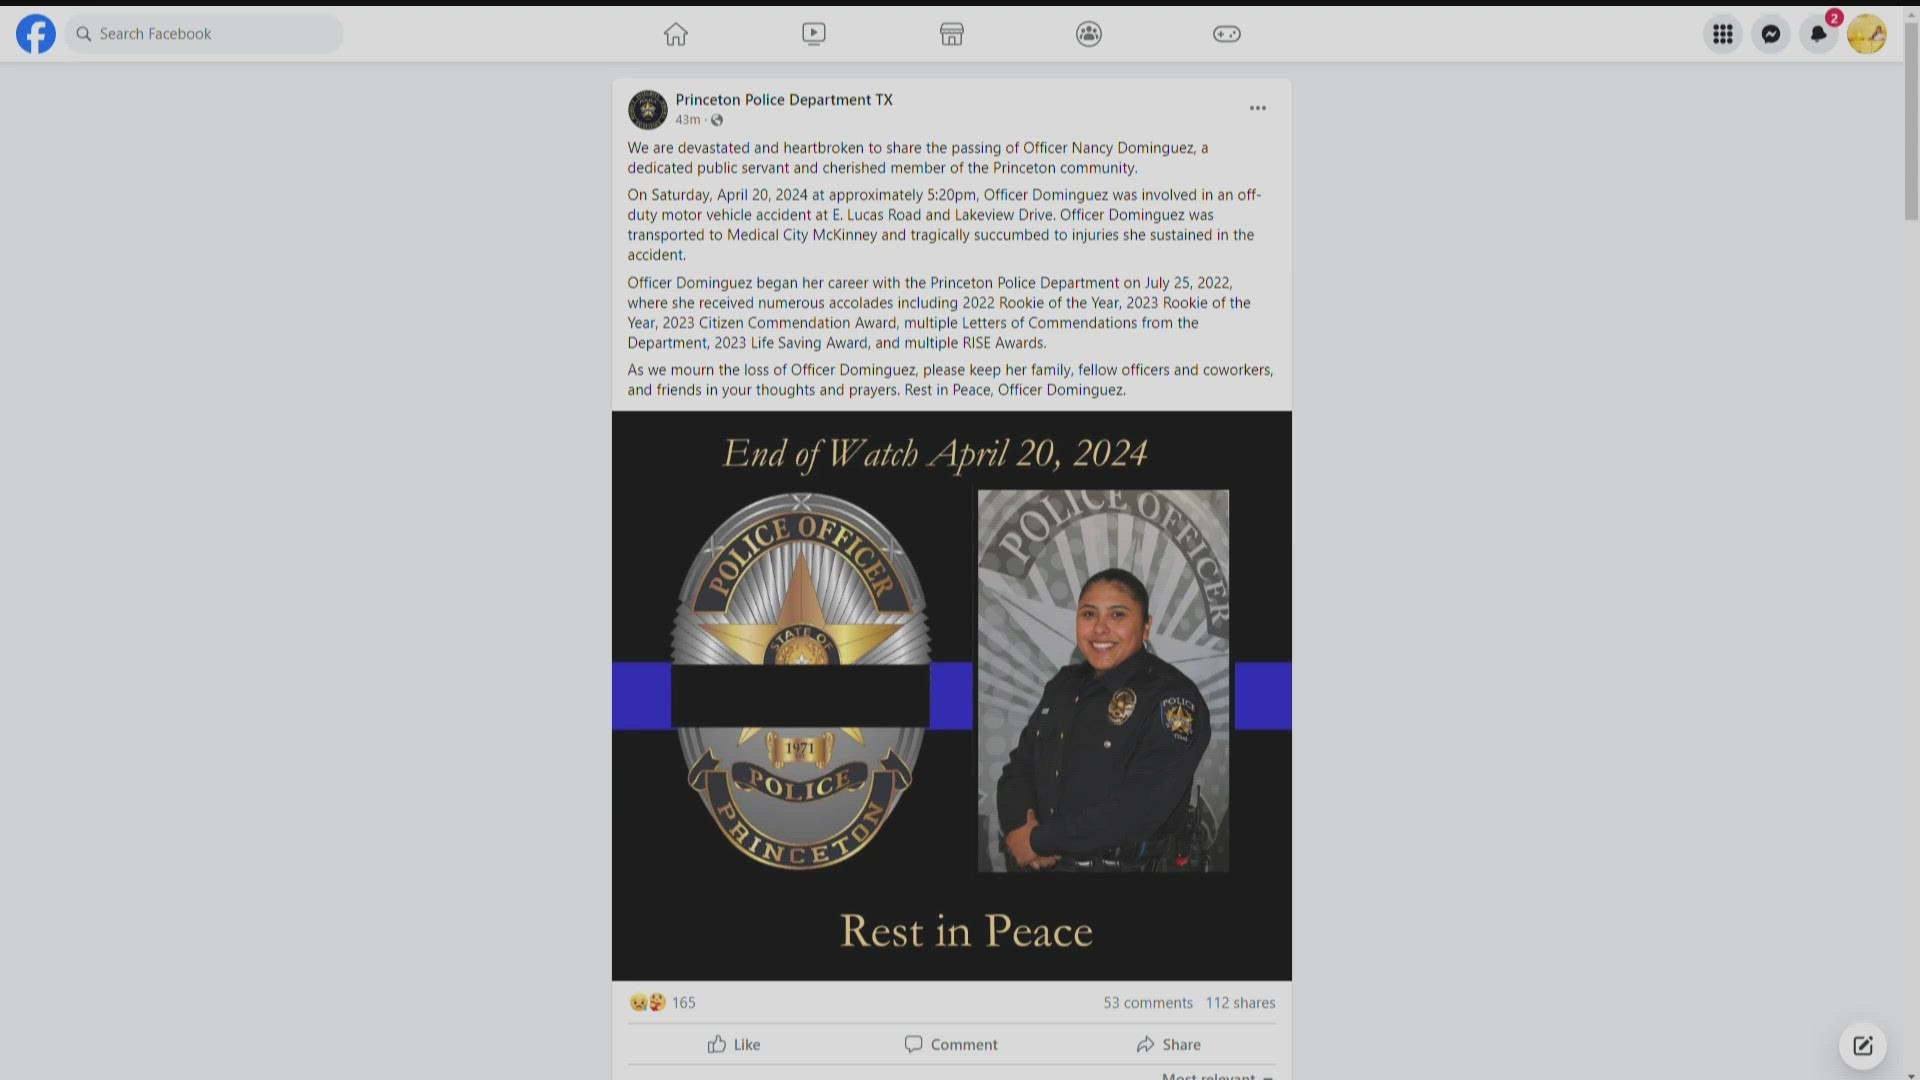 The officer is being remembered as a "dedicated public servant."